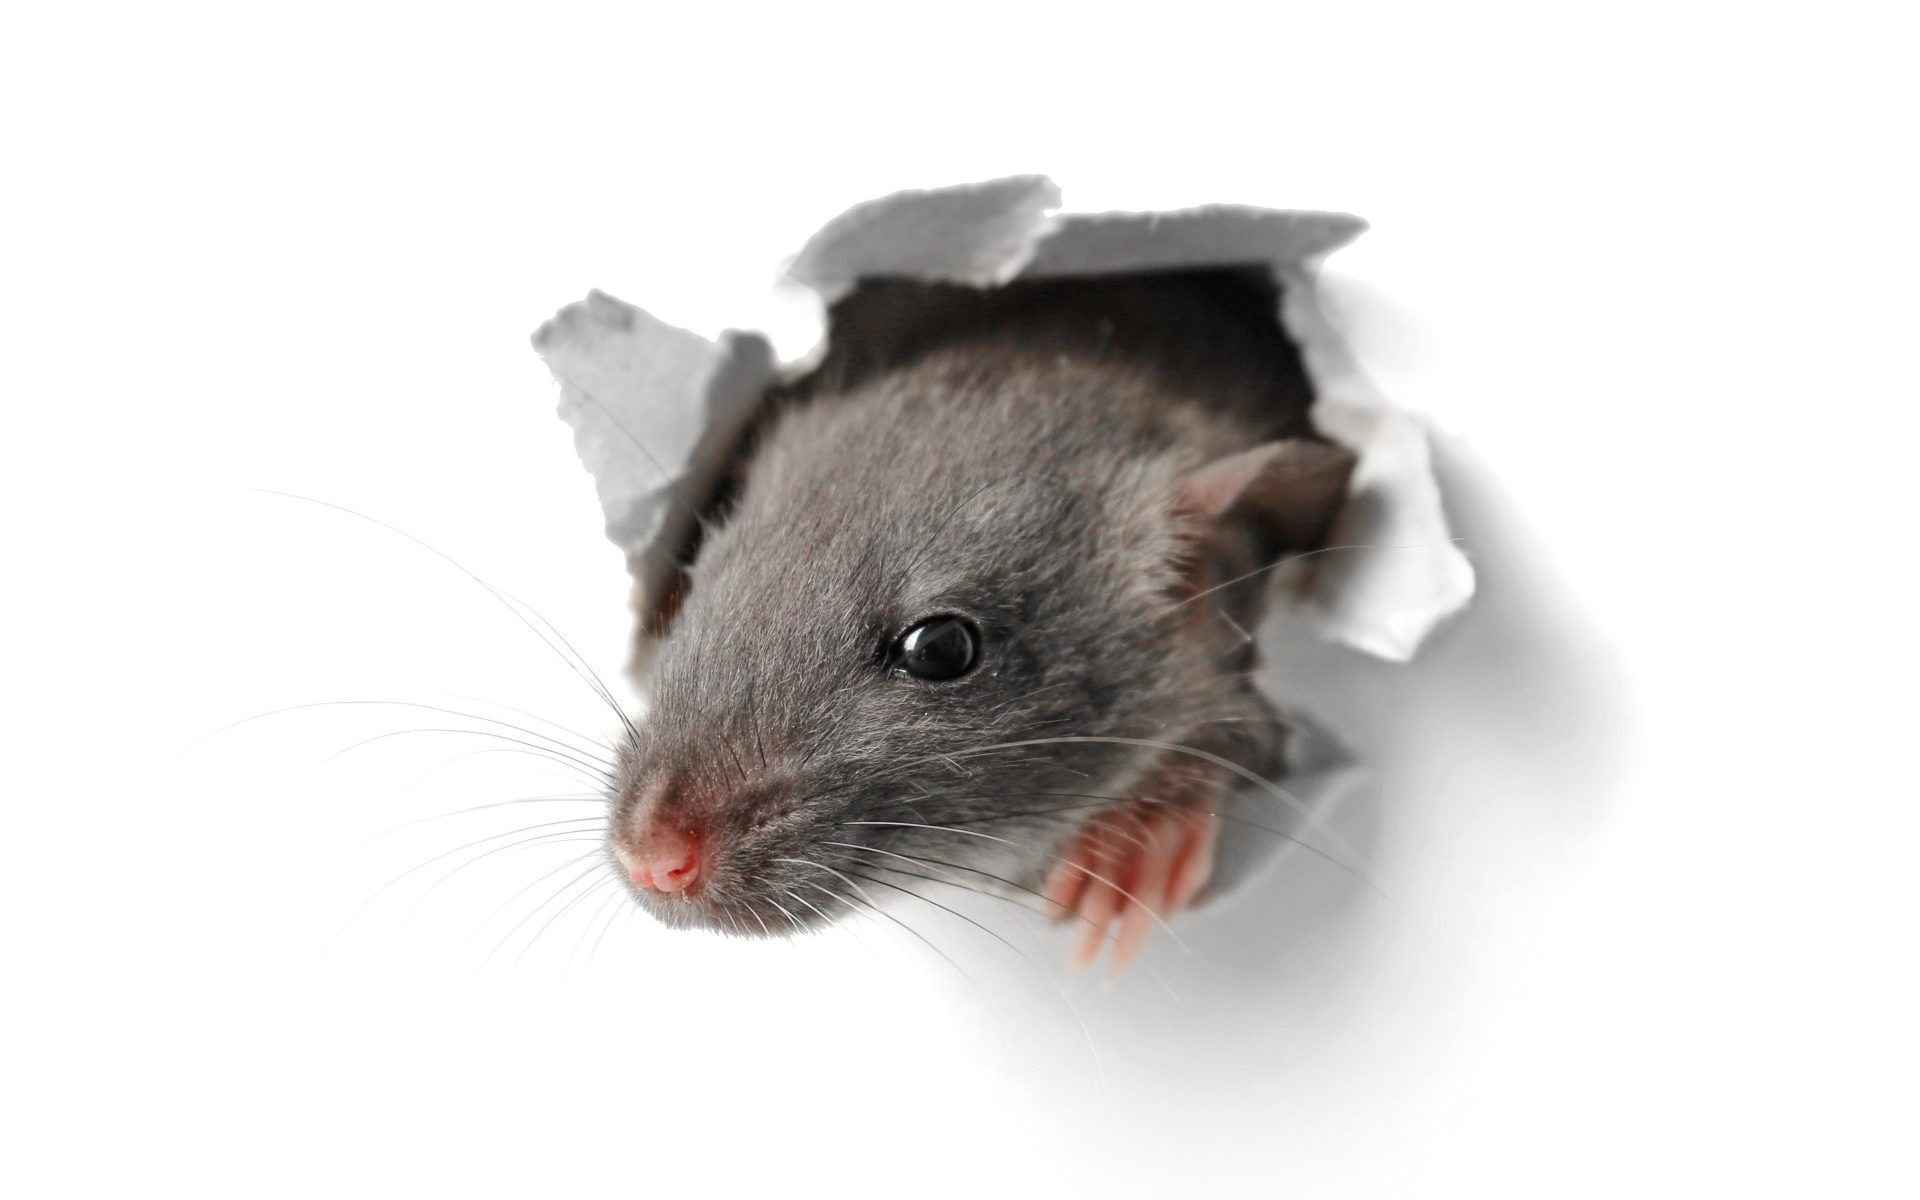 Winterizing Your Home Against Rodents